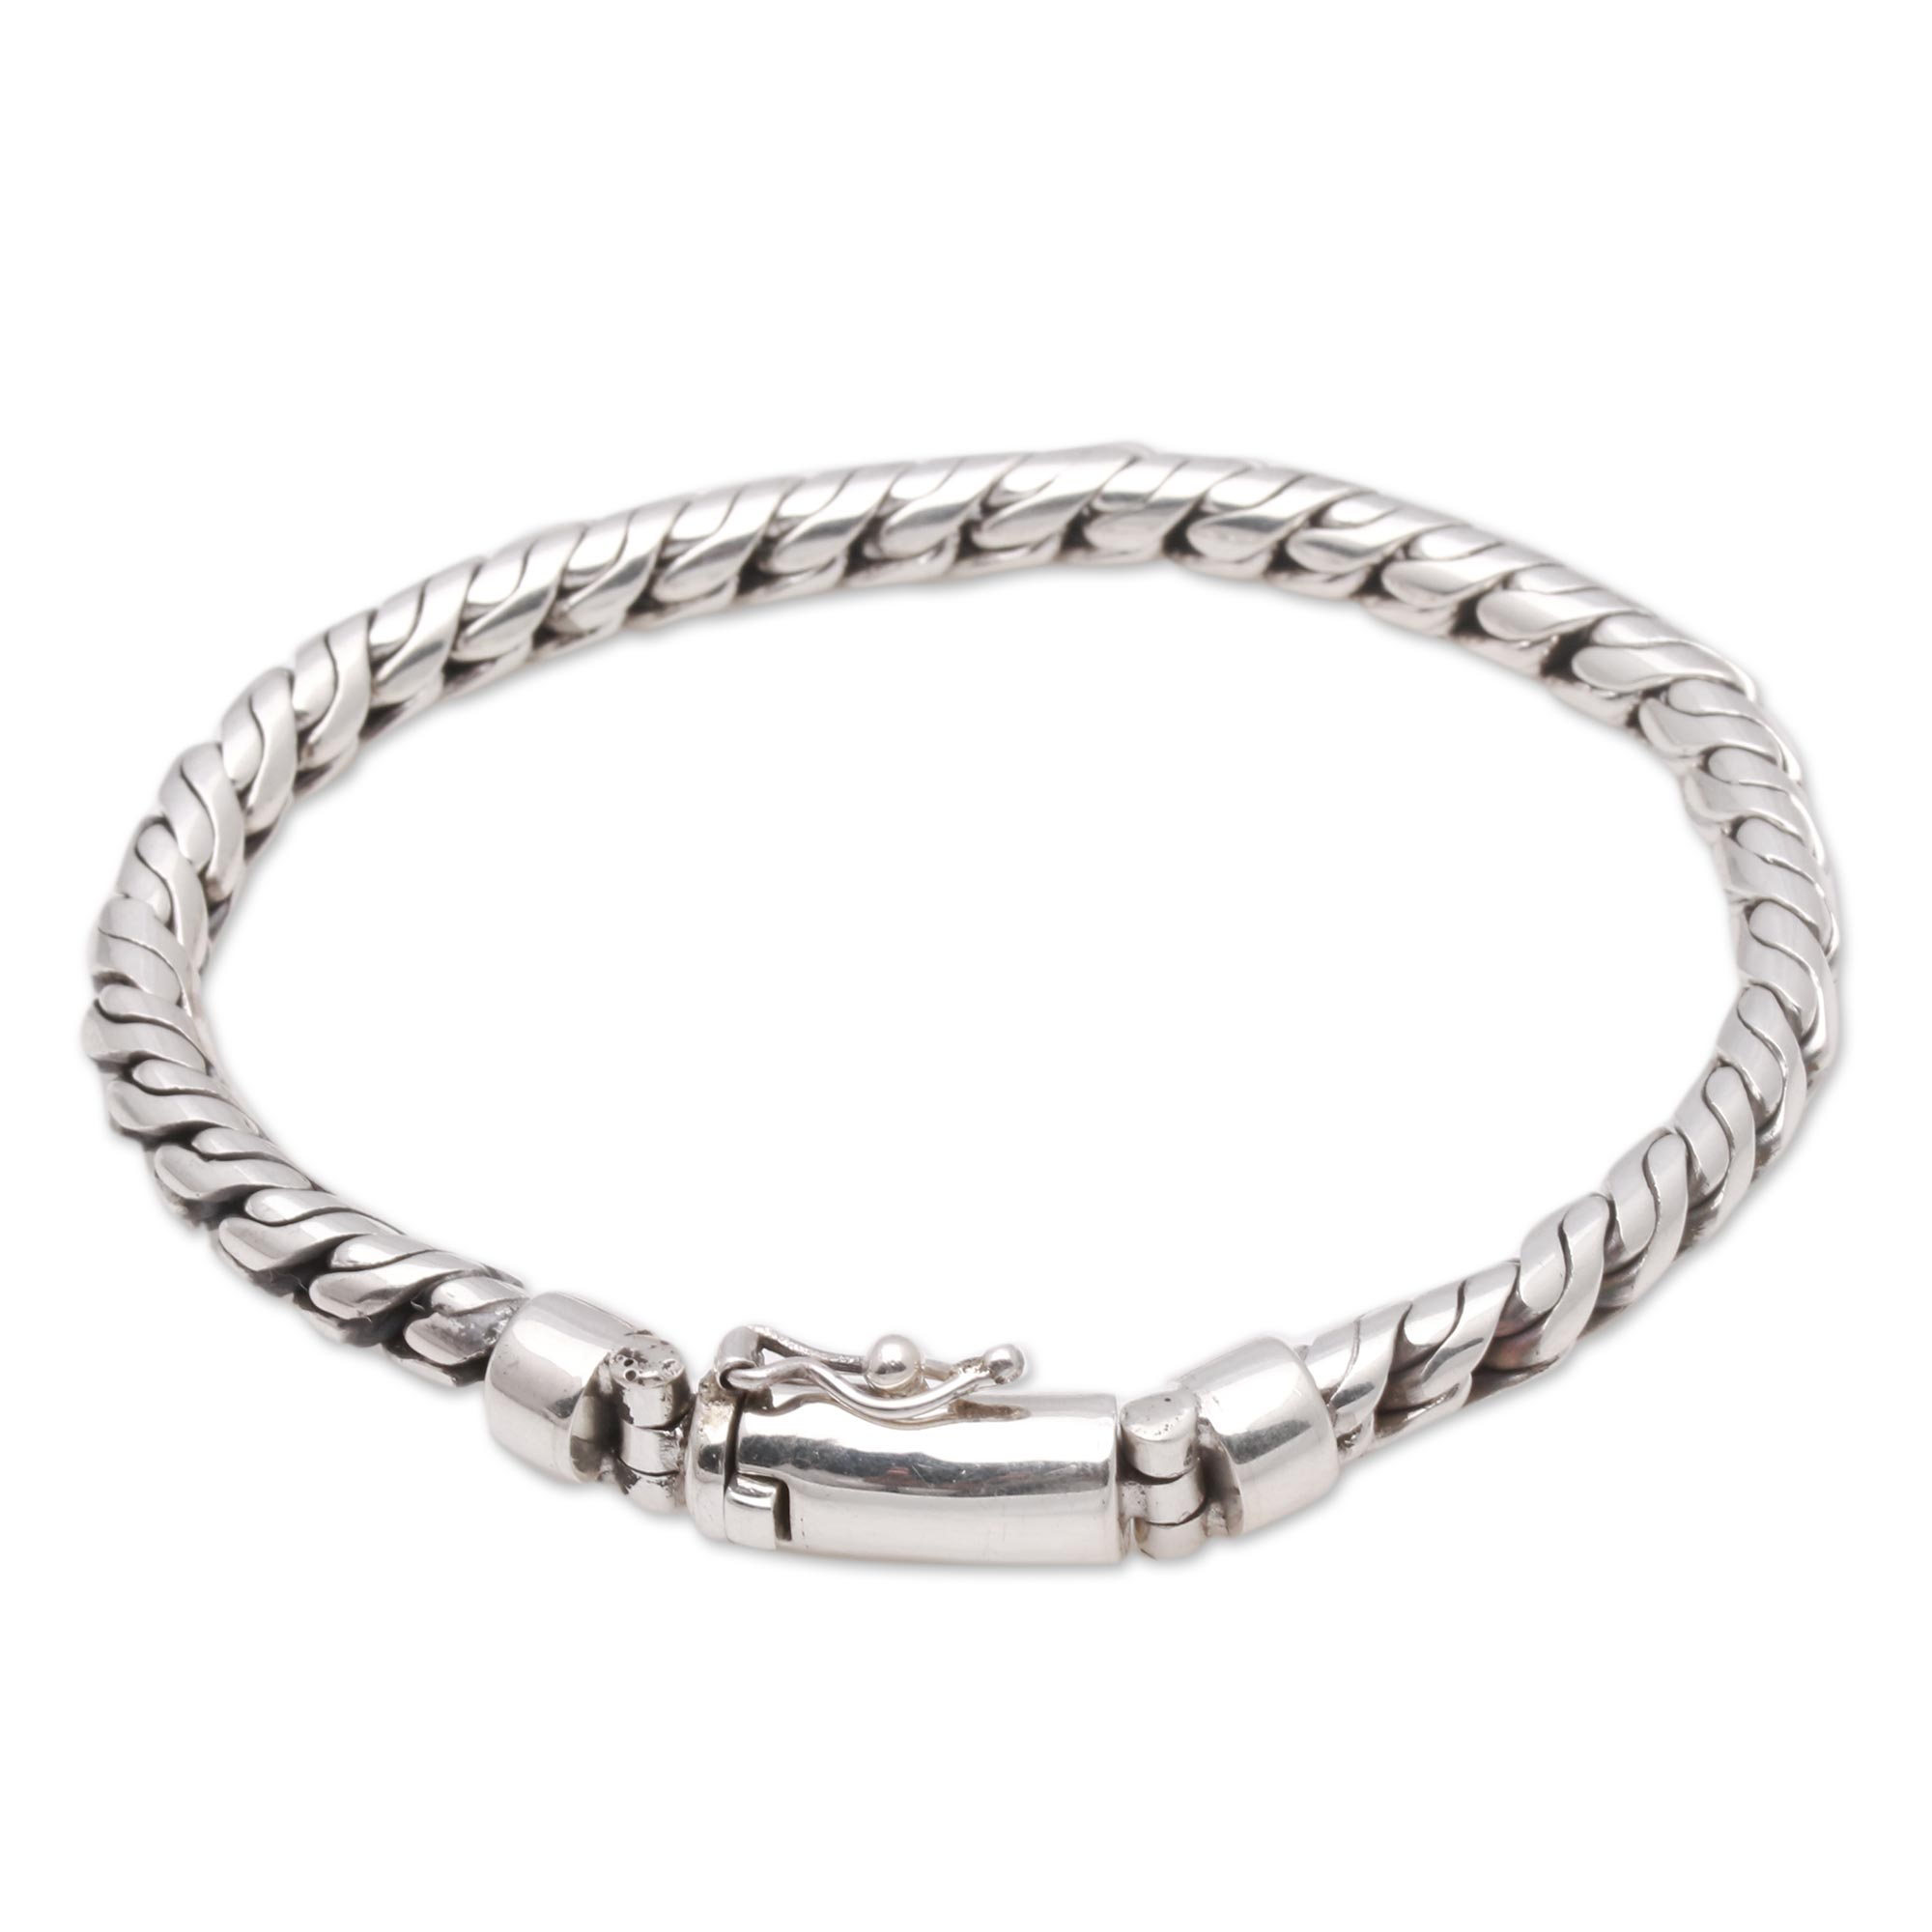 Unisex Sterling Silver Unique Link Chain Bracelet from Bali - Twining ...